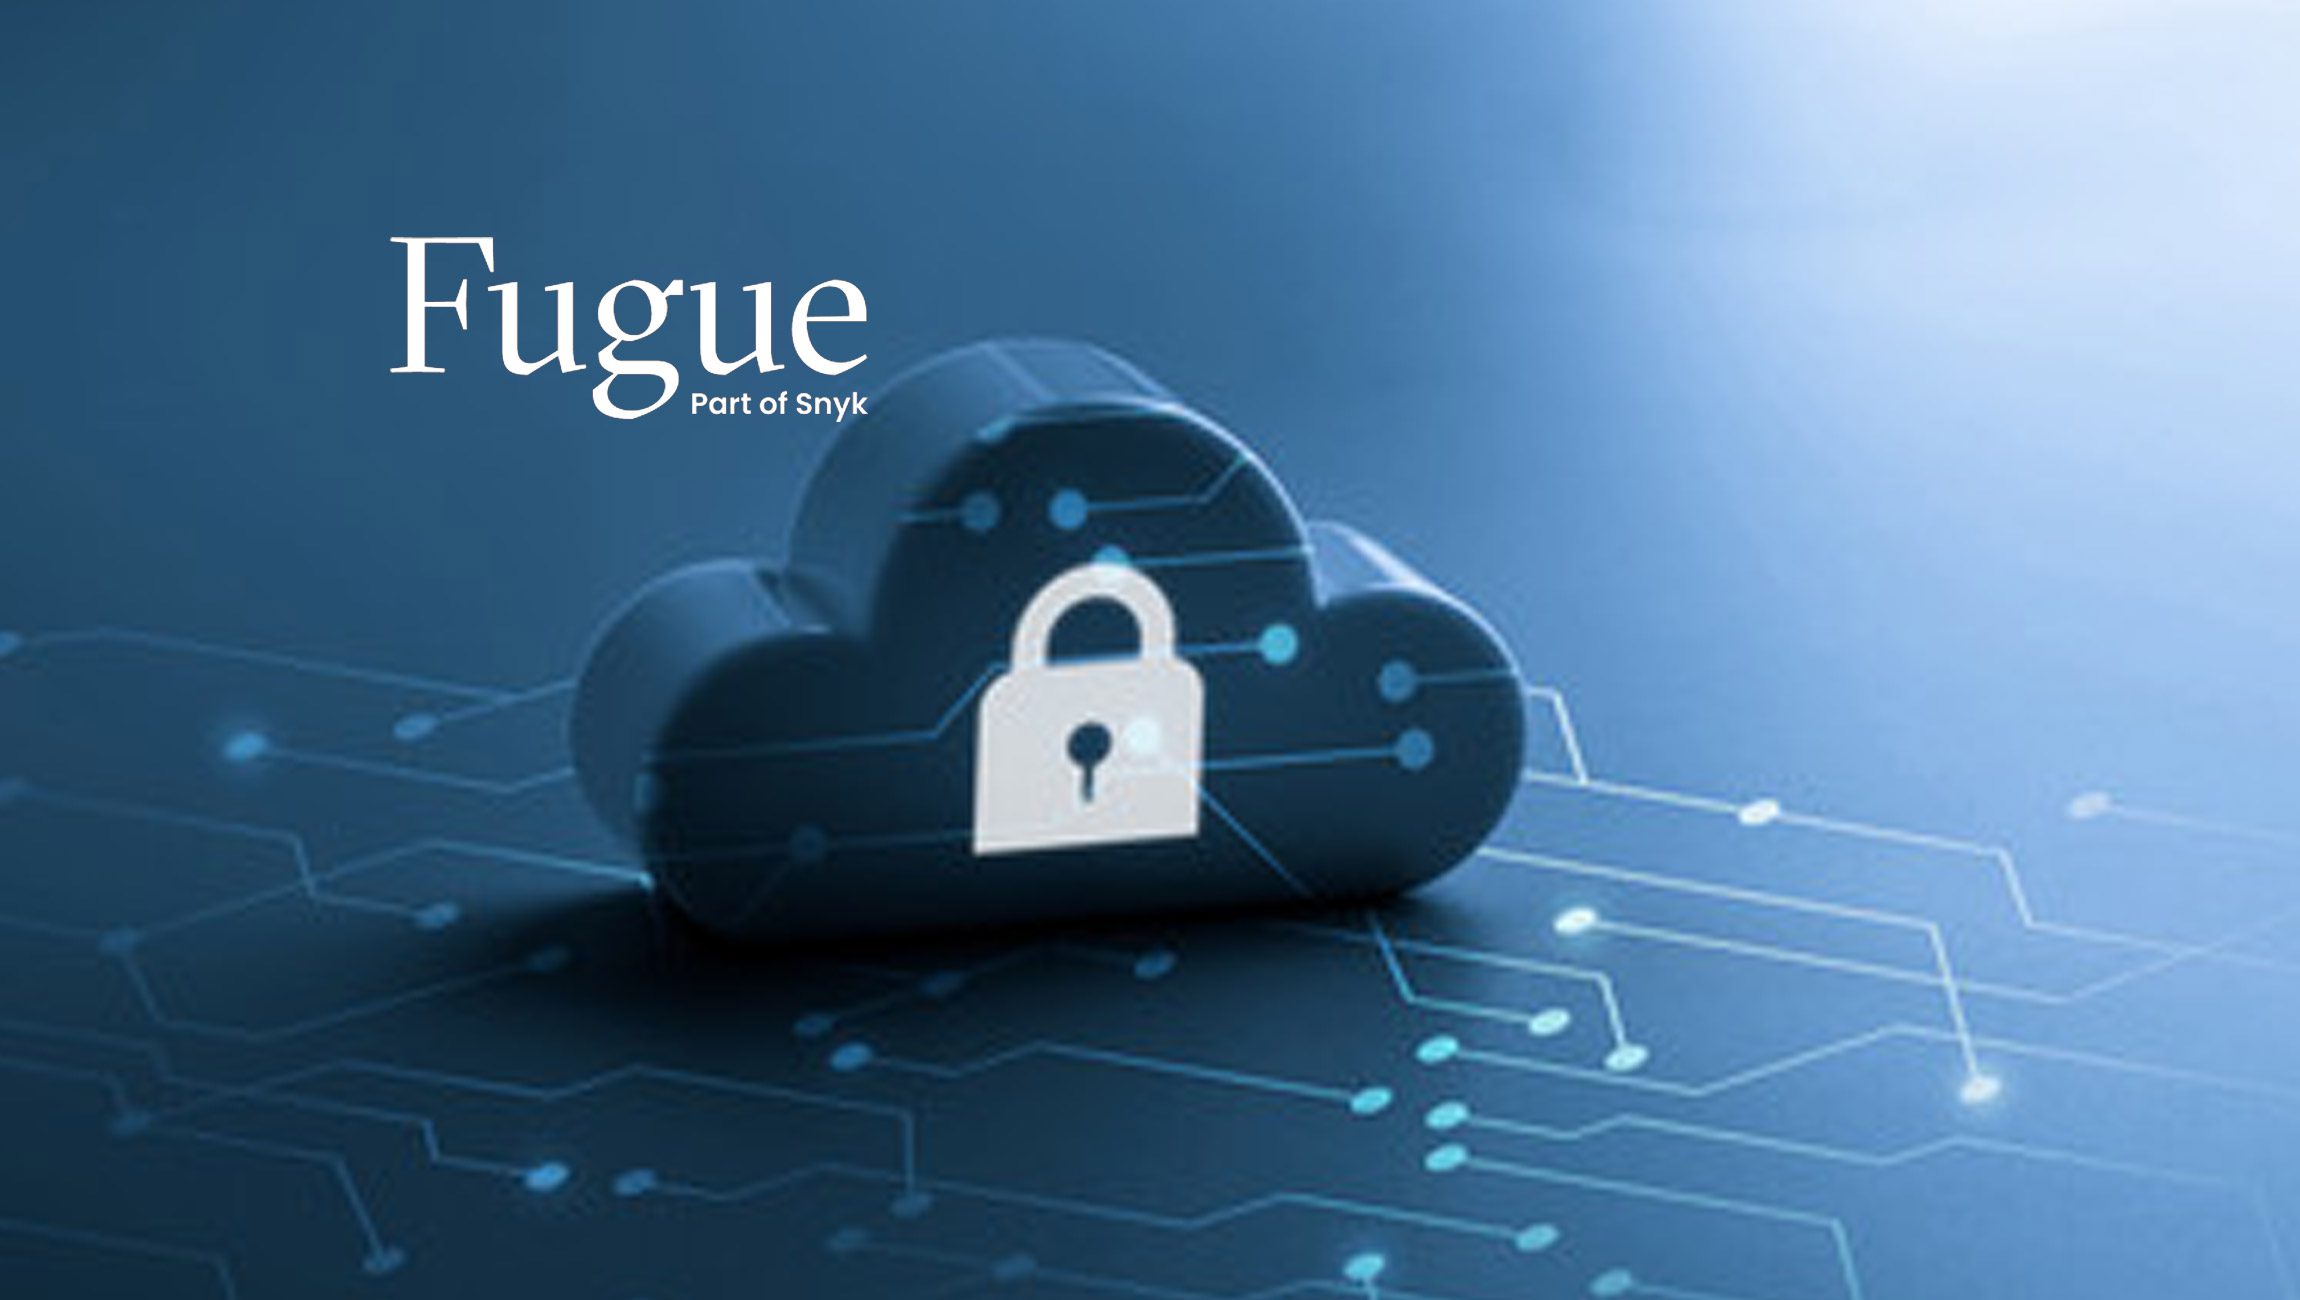 Fugue Extends Cloud Security Market Dominance in Customer Satisfaction, According to G2 Report